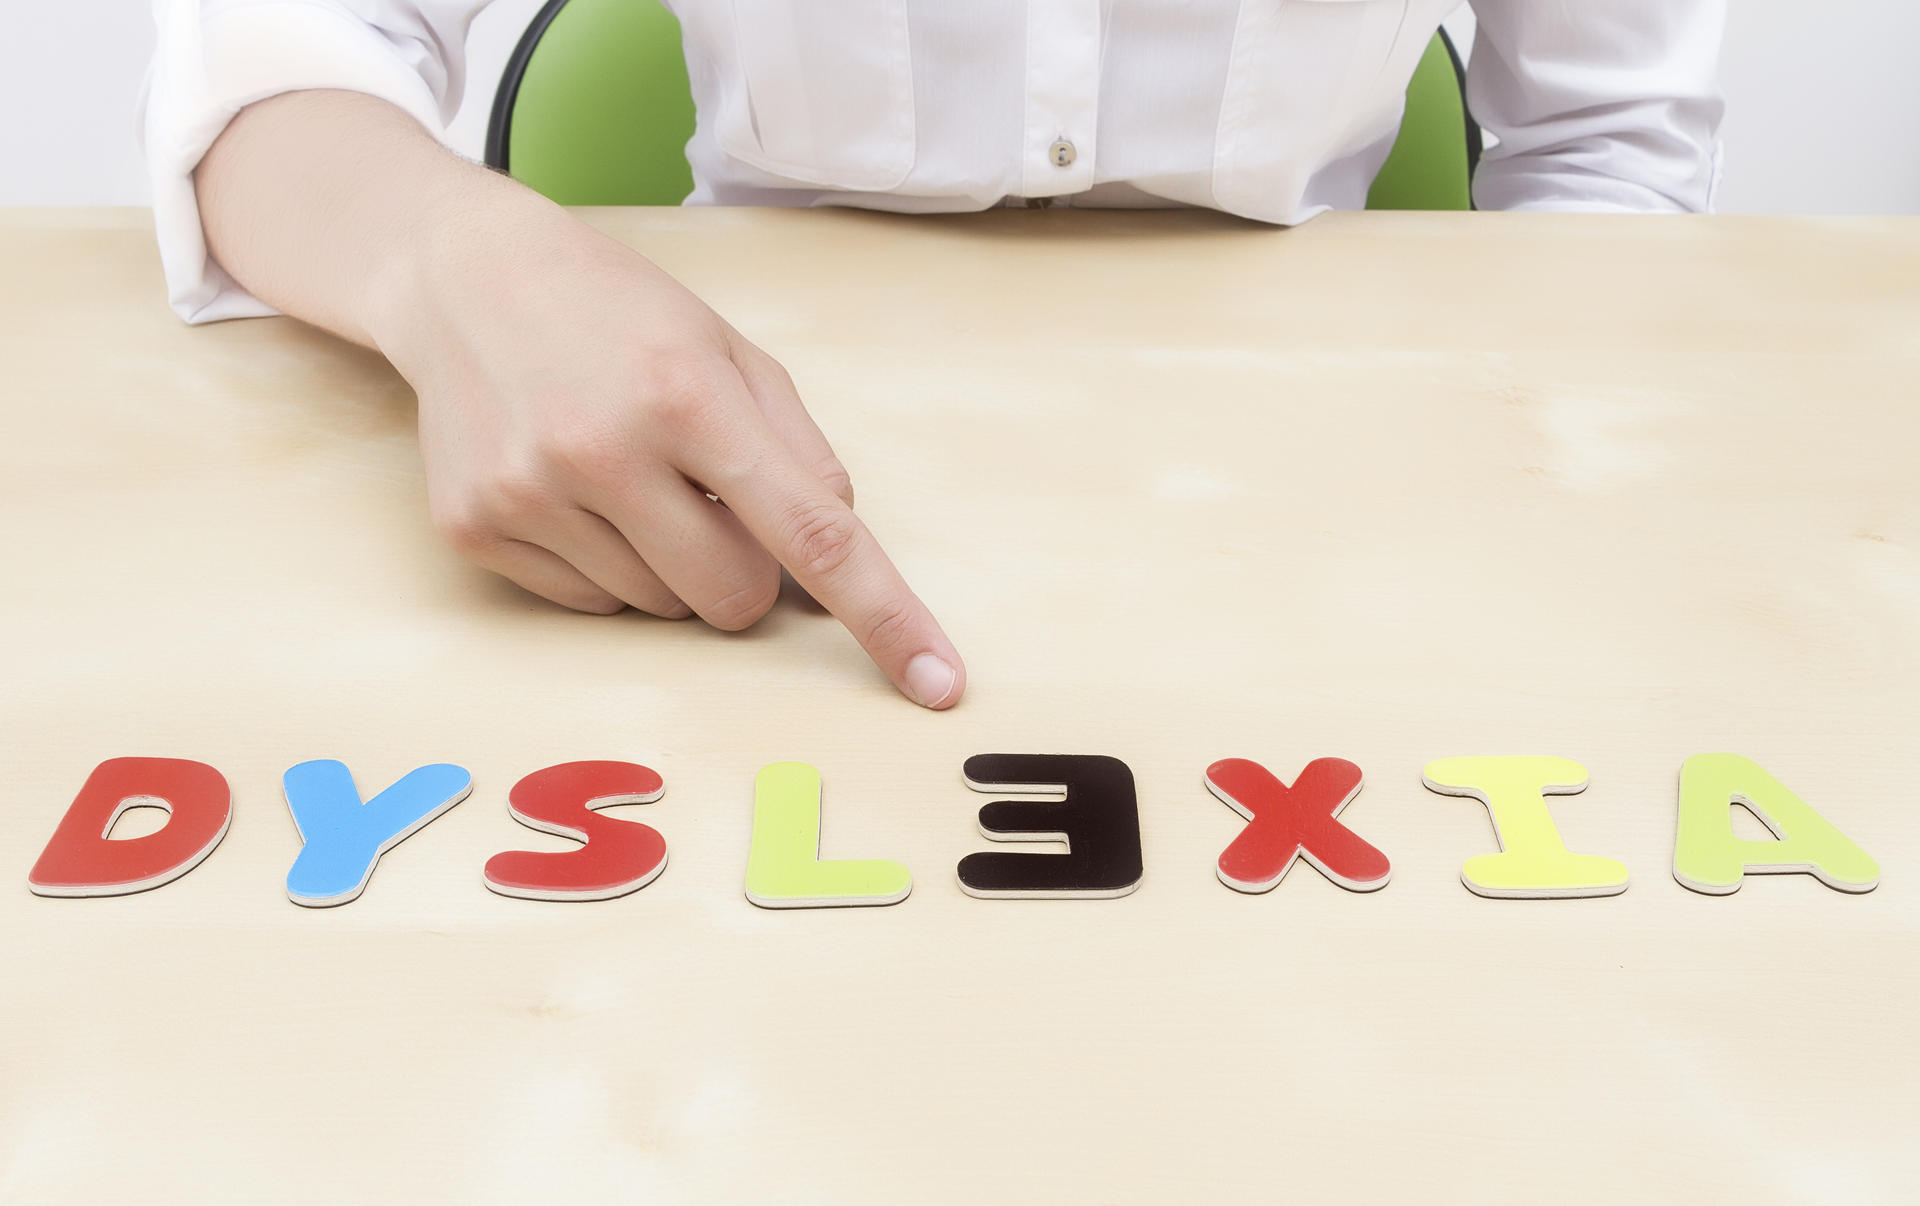 Therapy can help children deal with dyslexia. Photo: Shutterstock